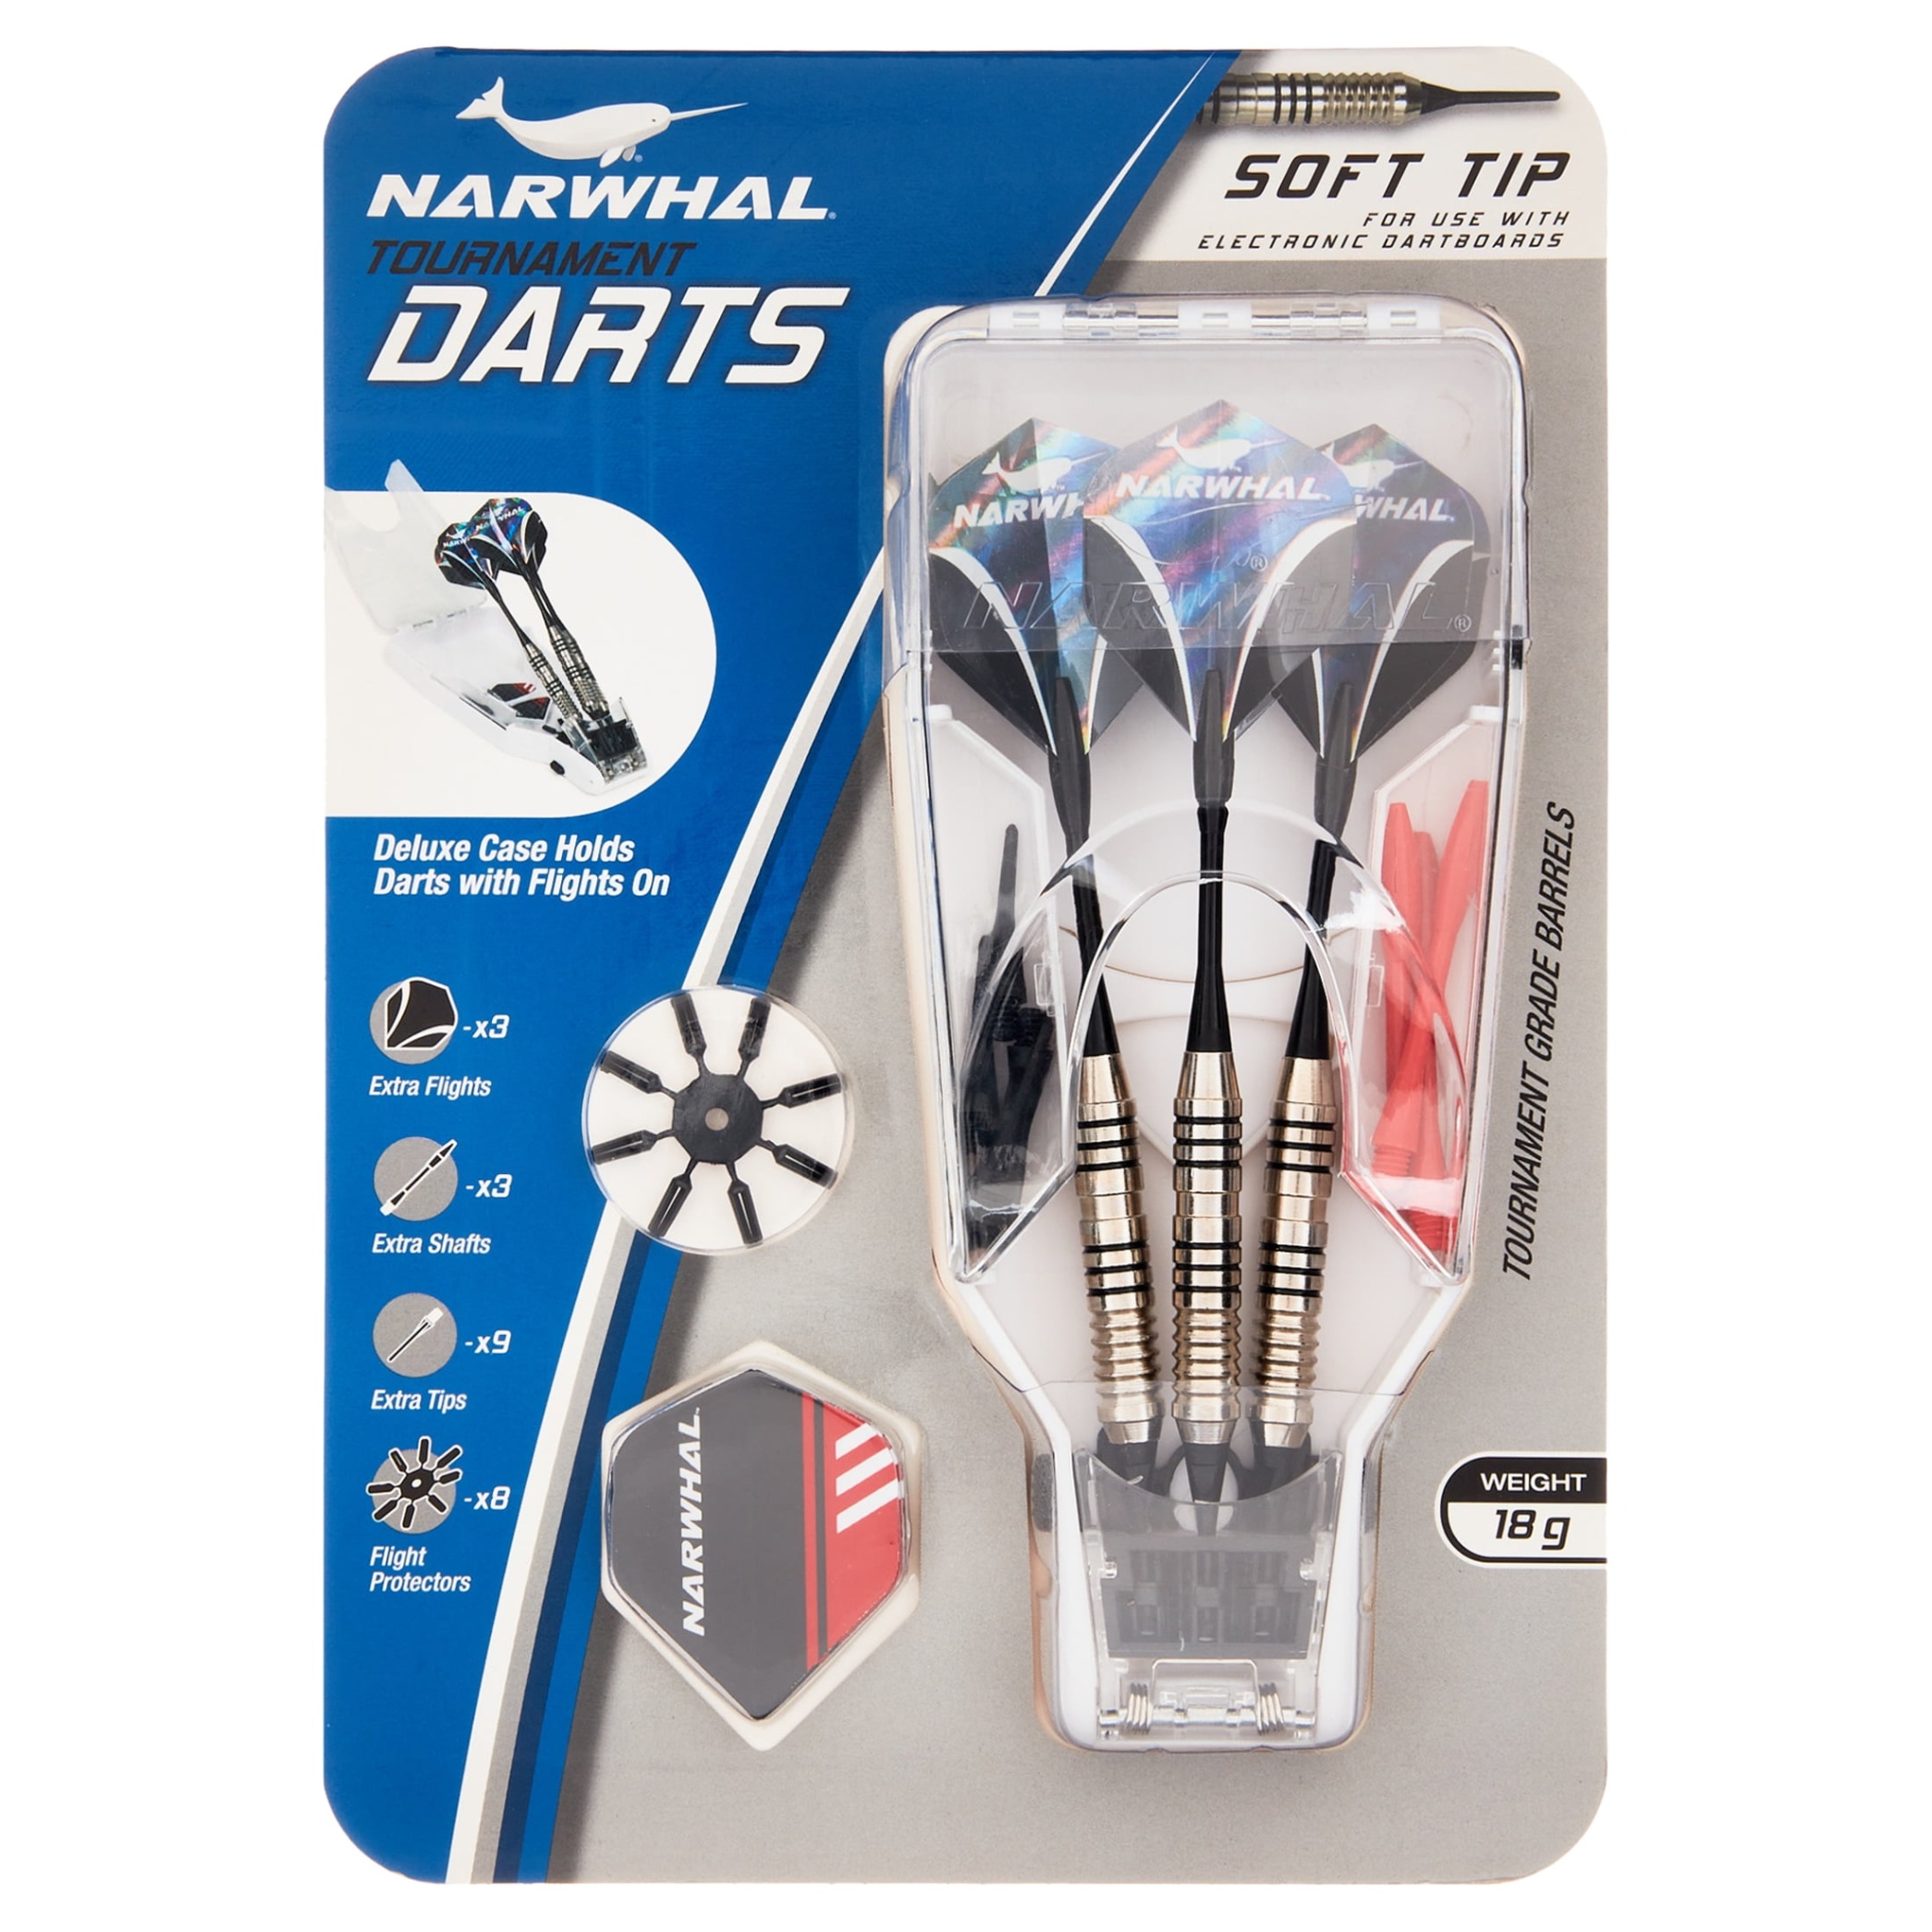 Get Your Game On: Find The Best Dart Accessories Near You!